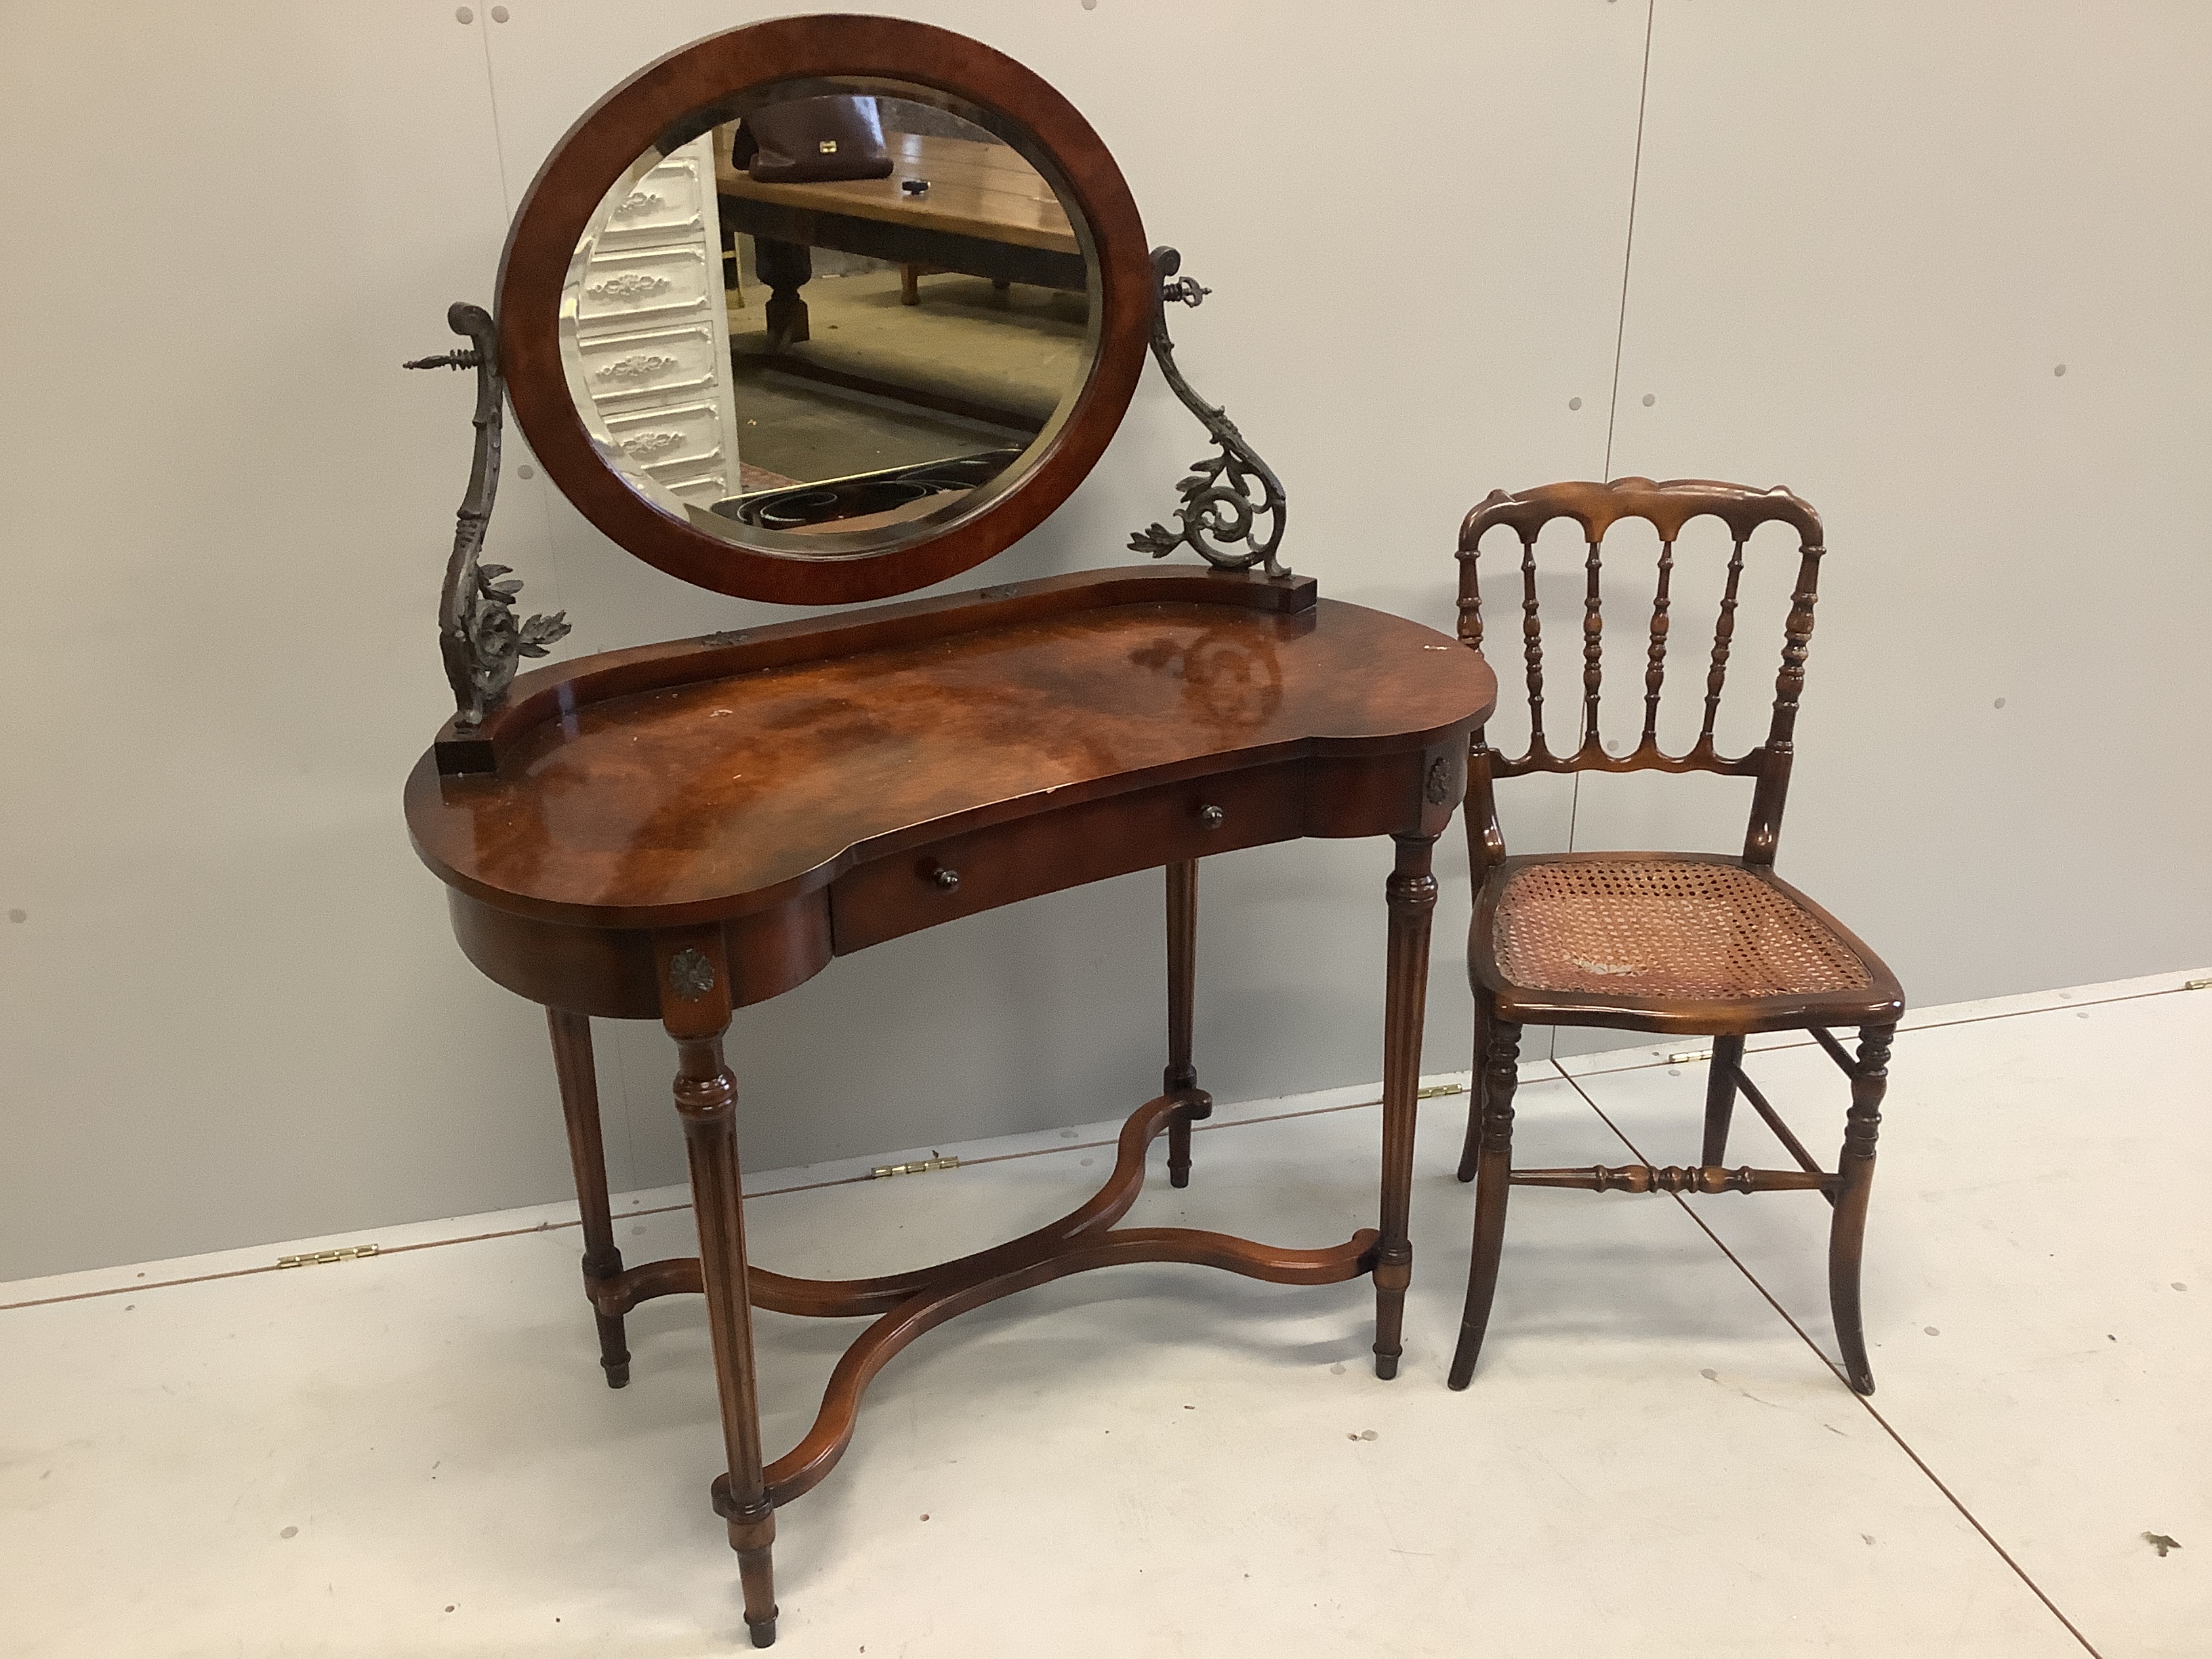 A Theodore Alexander bird's eye maple Empire style kidney shaped dressing table, width 100cm, depth 52cm, height 132cm and a cane seat chair